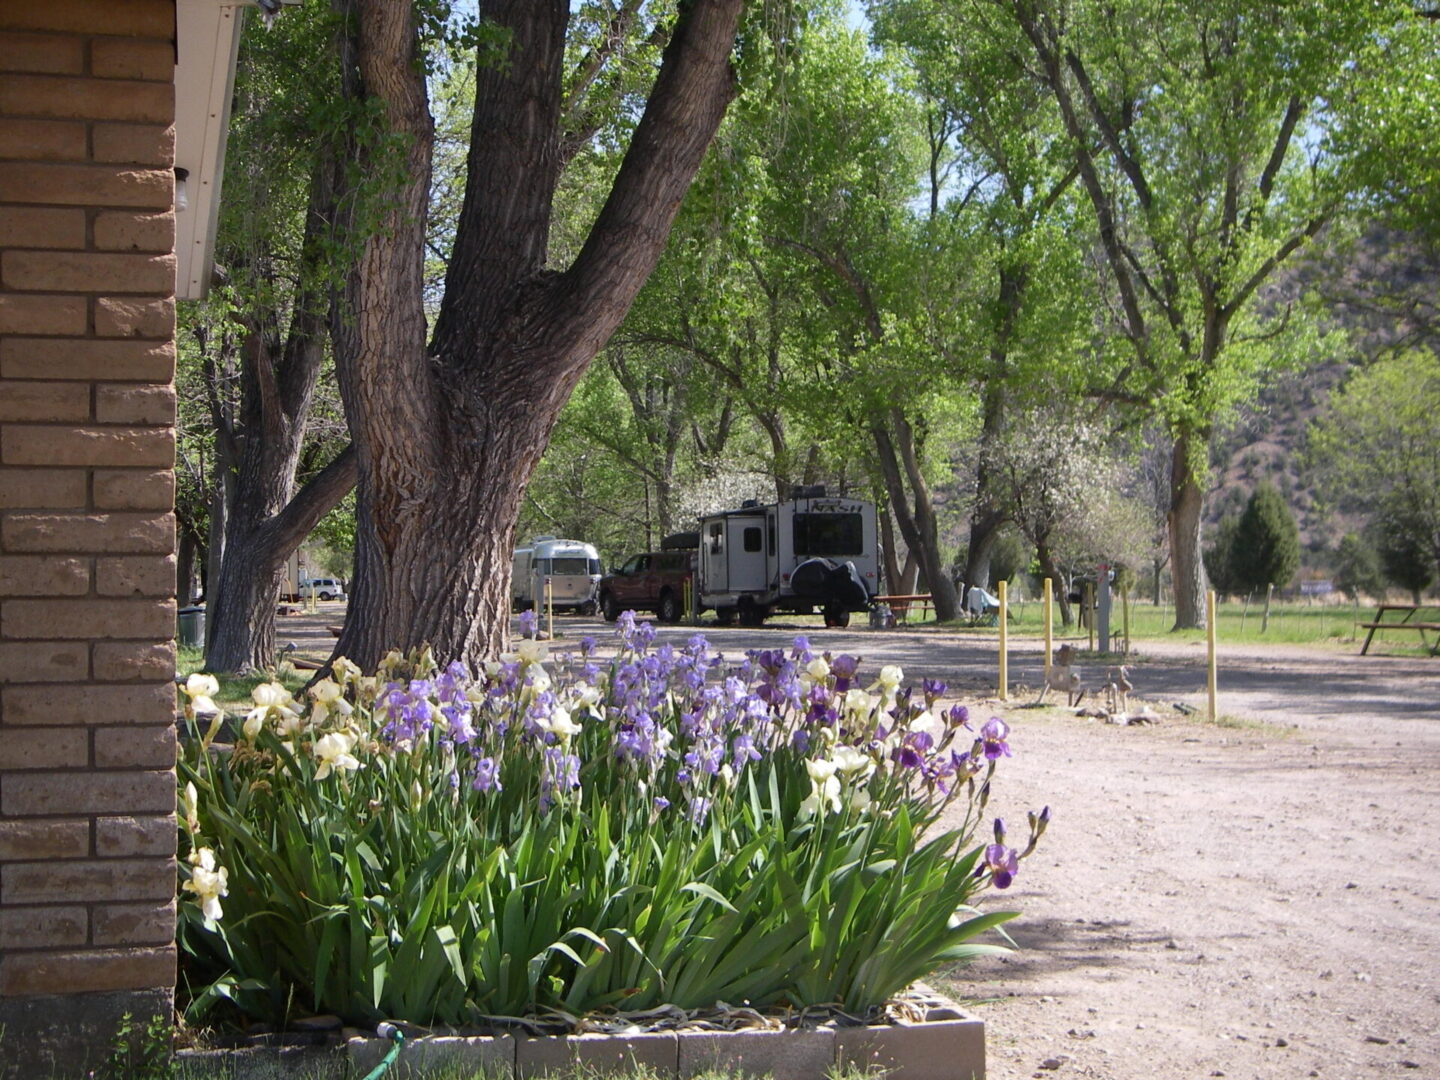 A truck parked in front of a tree with flowers growing on it.